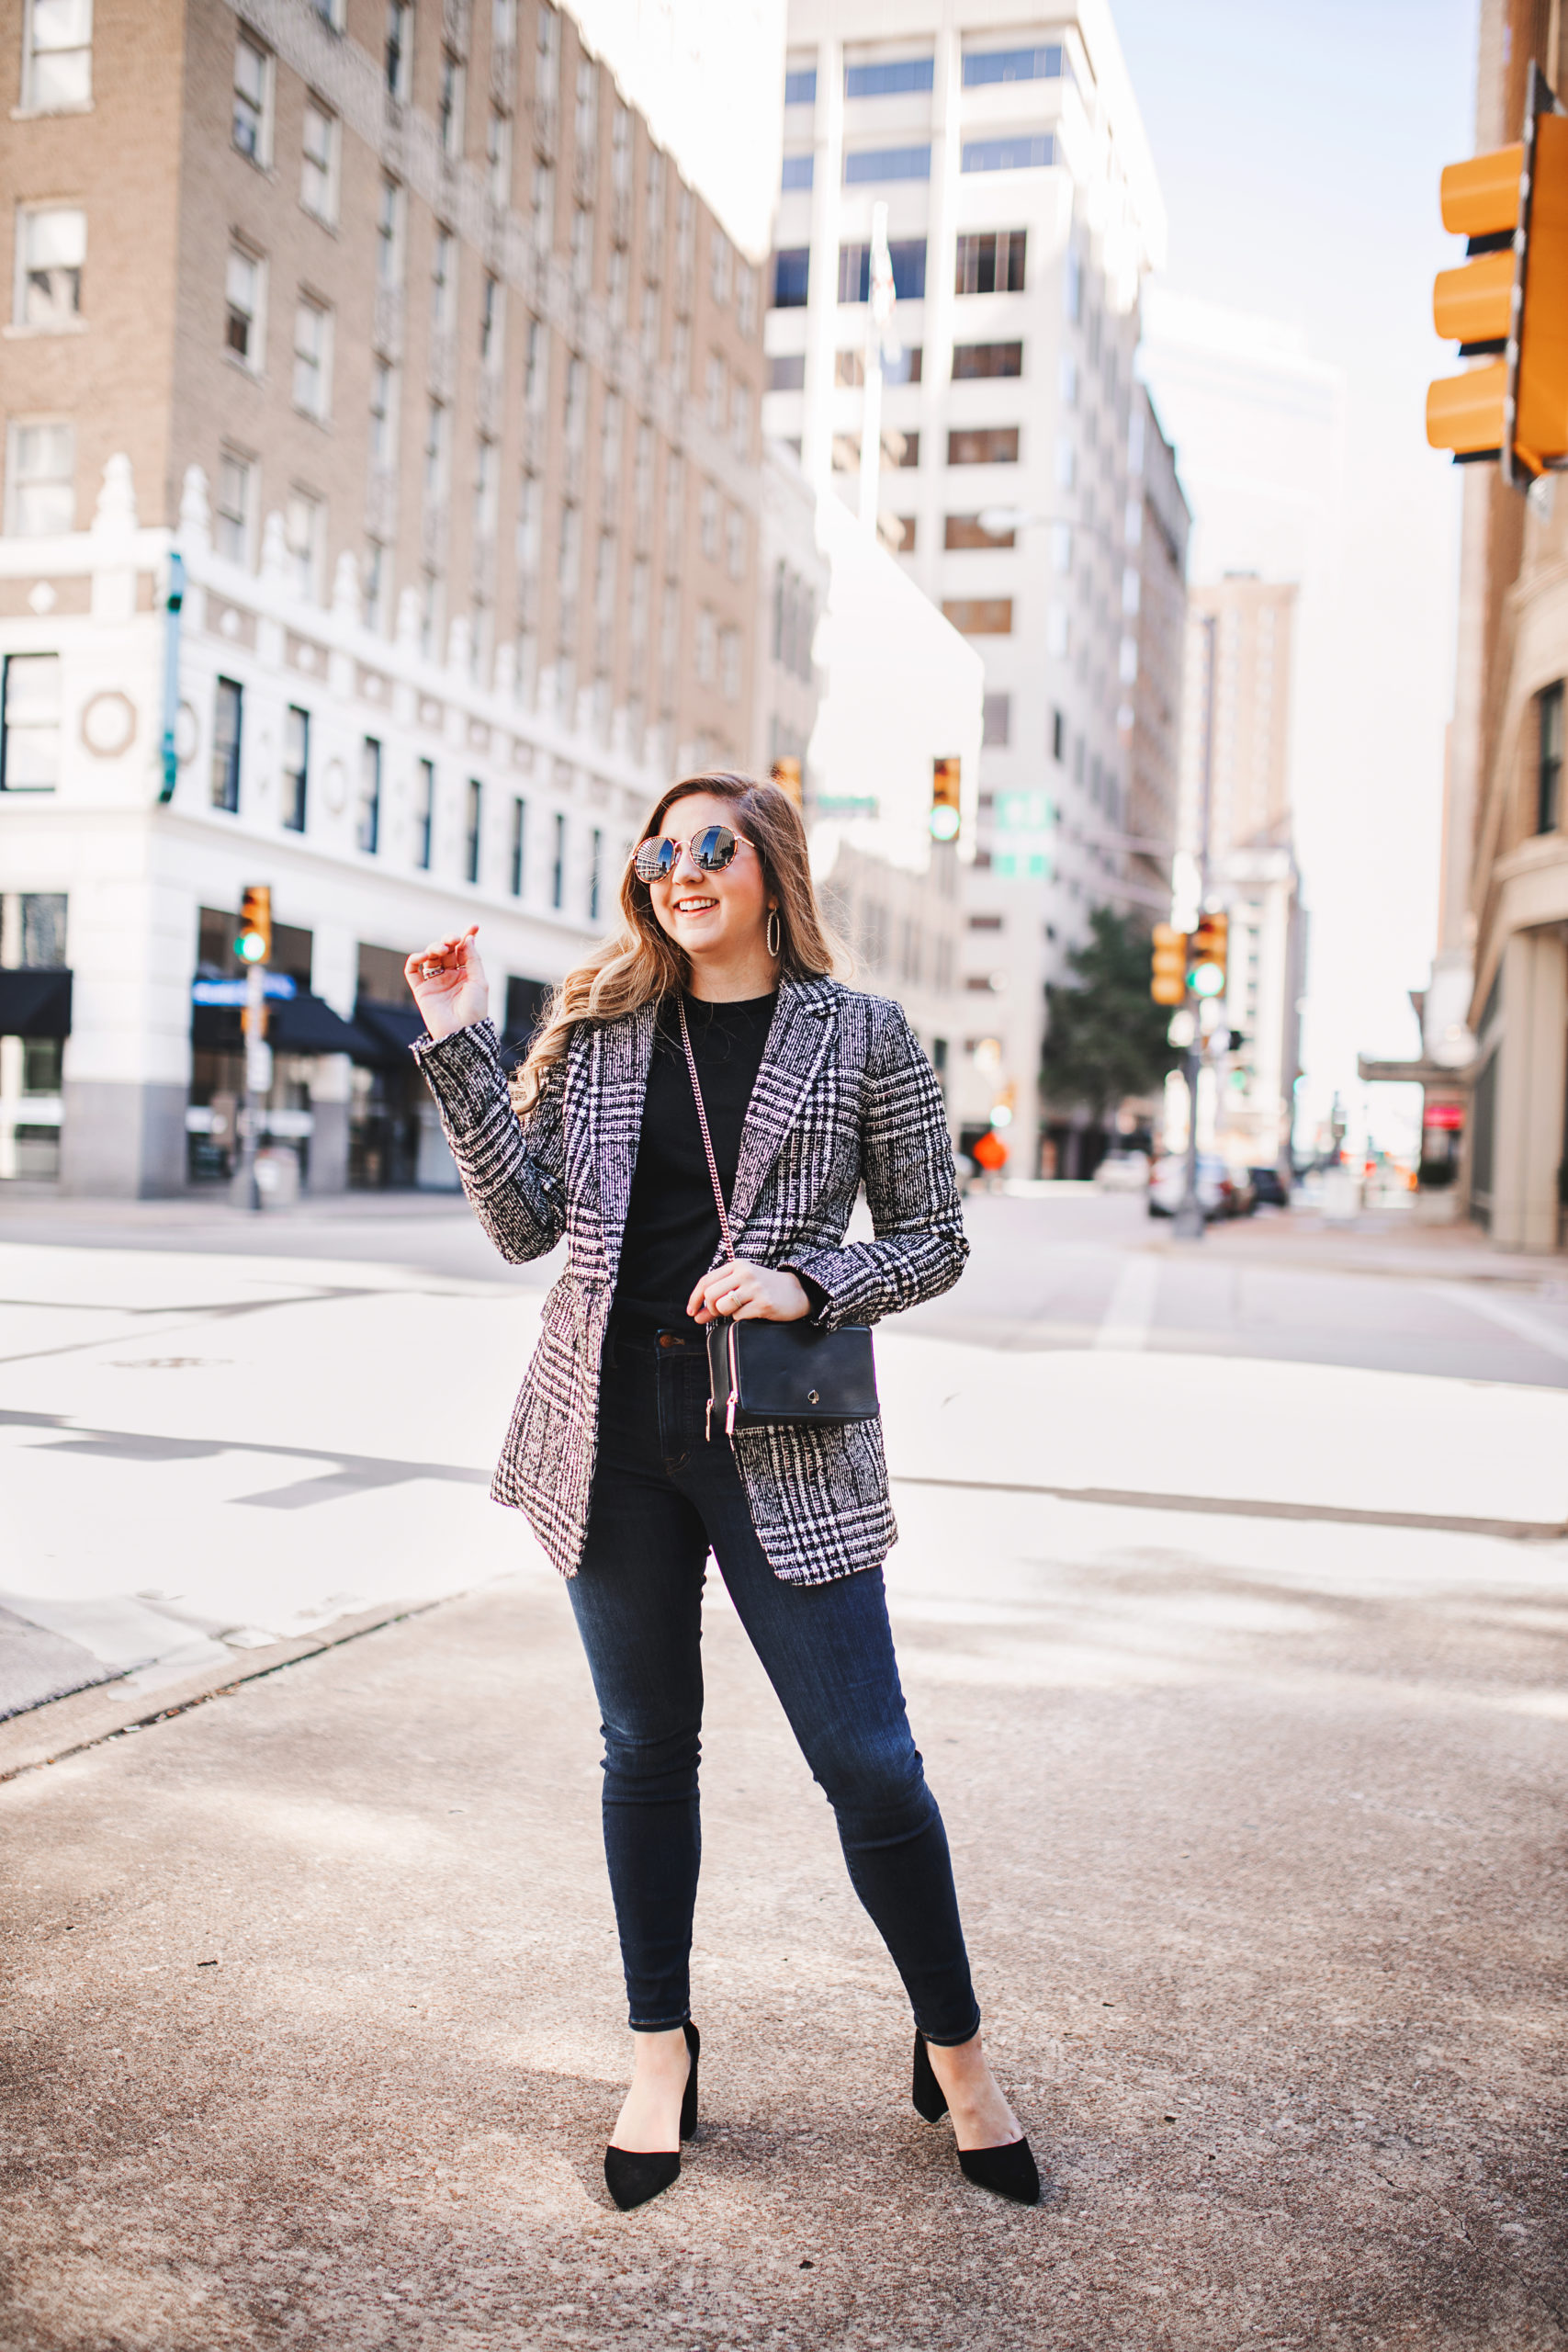 How To Style A Long Blazer For Work - Thrifty Pineapple